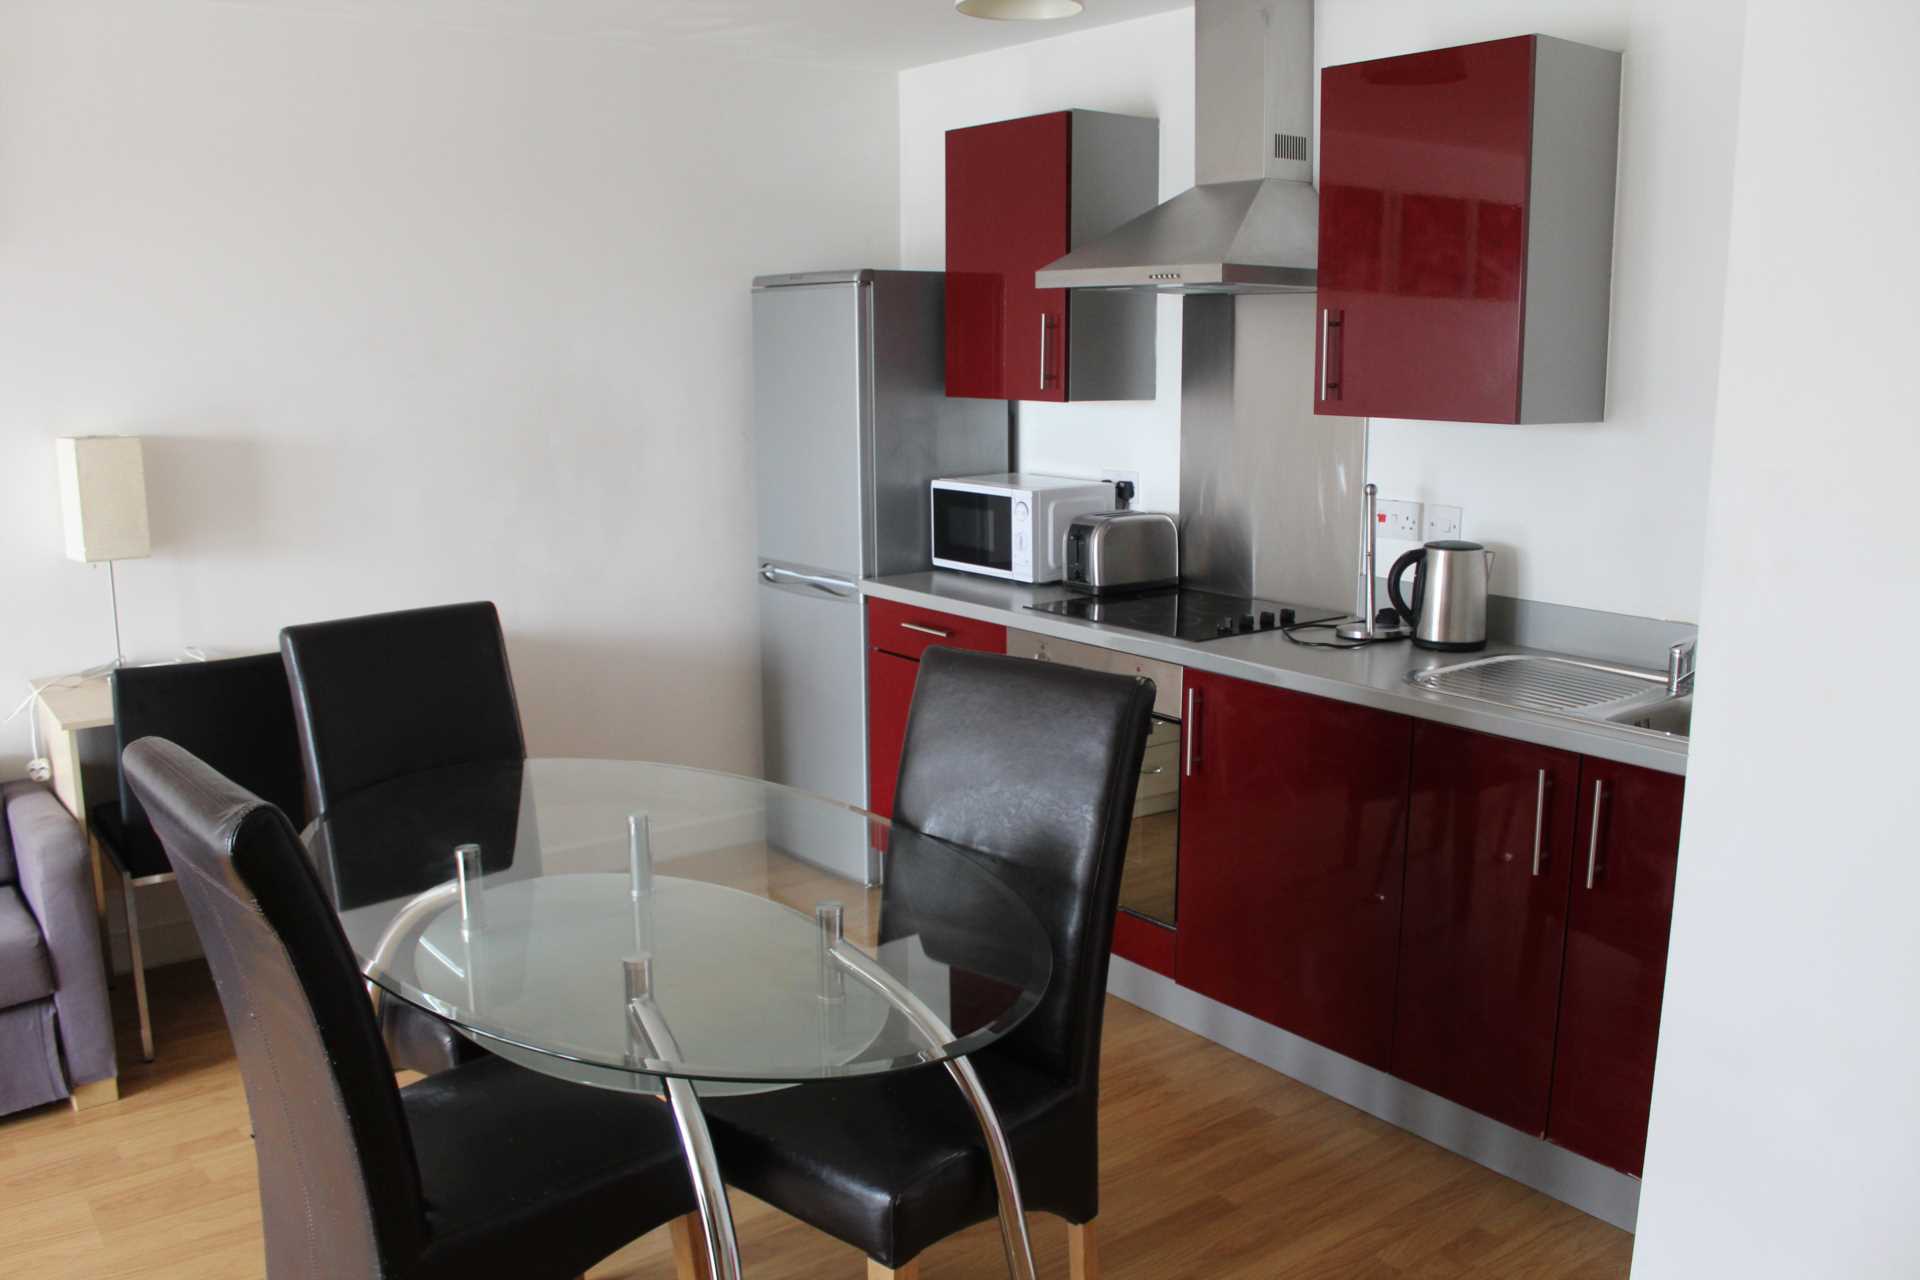 2 bed Room for rent in Salford. From Student Haus